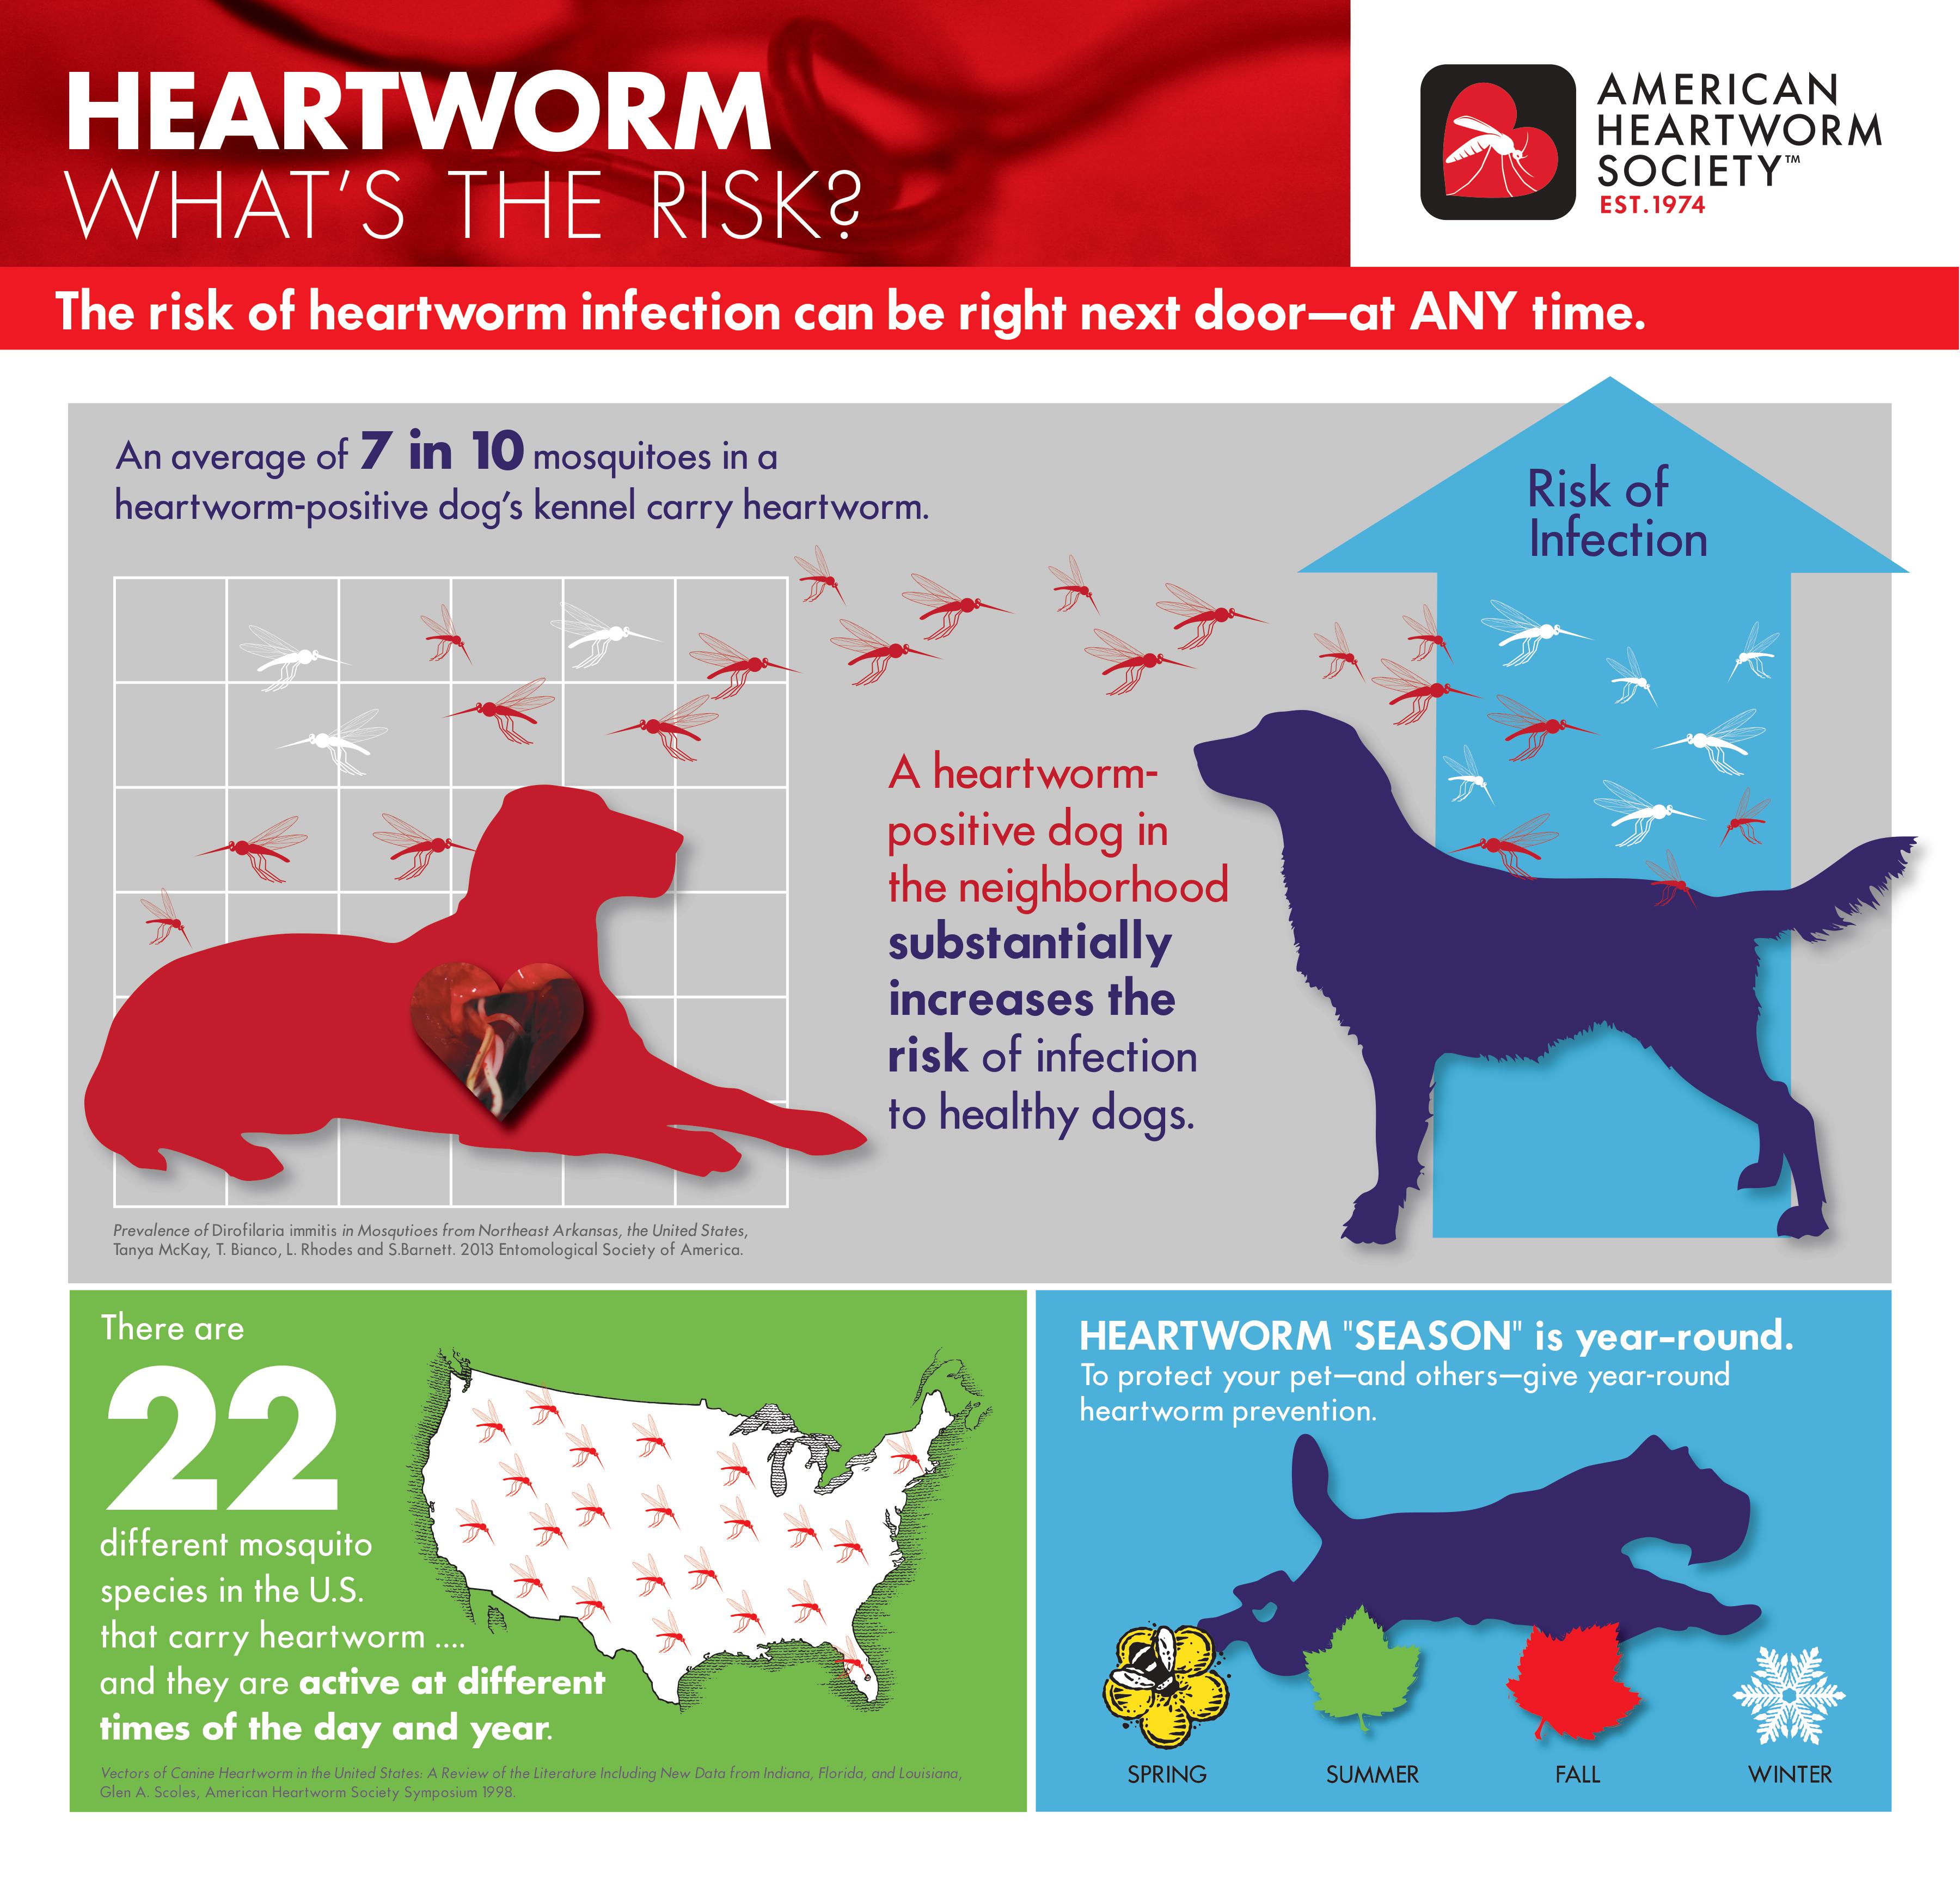 once a year heartworm prevention